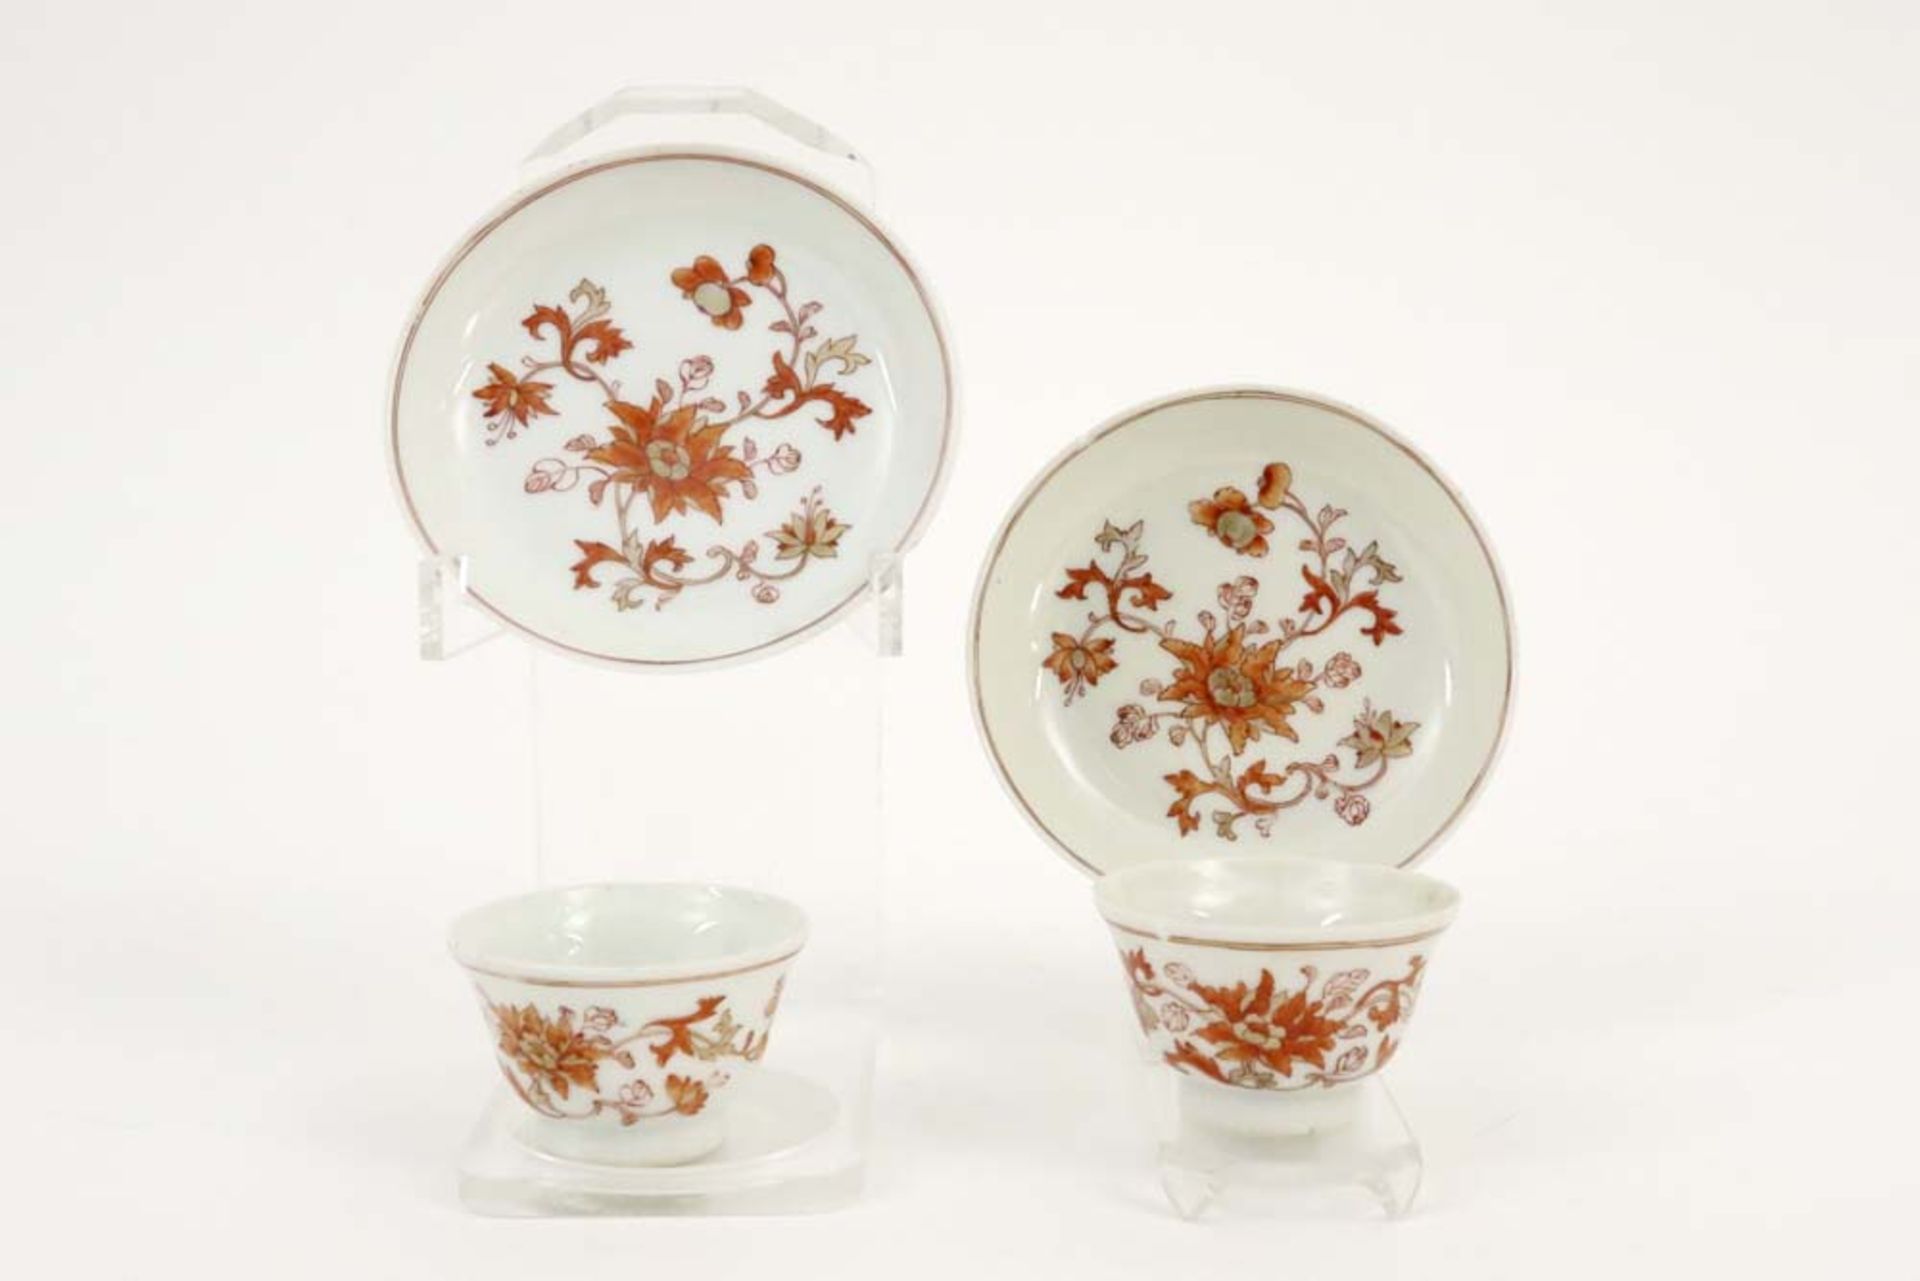 two 18th Cent. Chinese sets of cup and saucer in porcelain with a flower decor in sanguine colors - Image 6 of 7